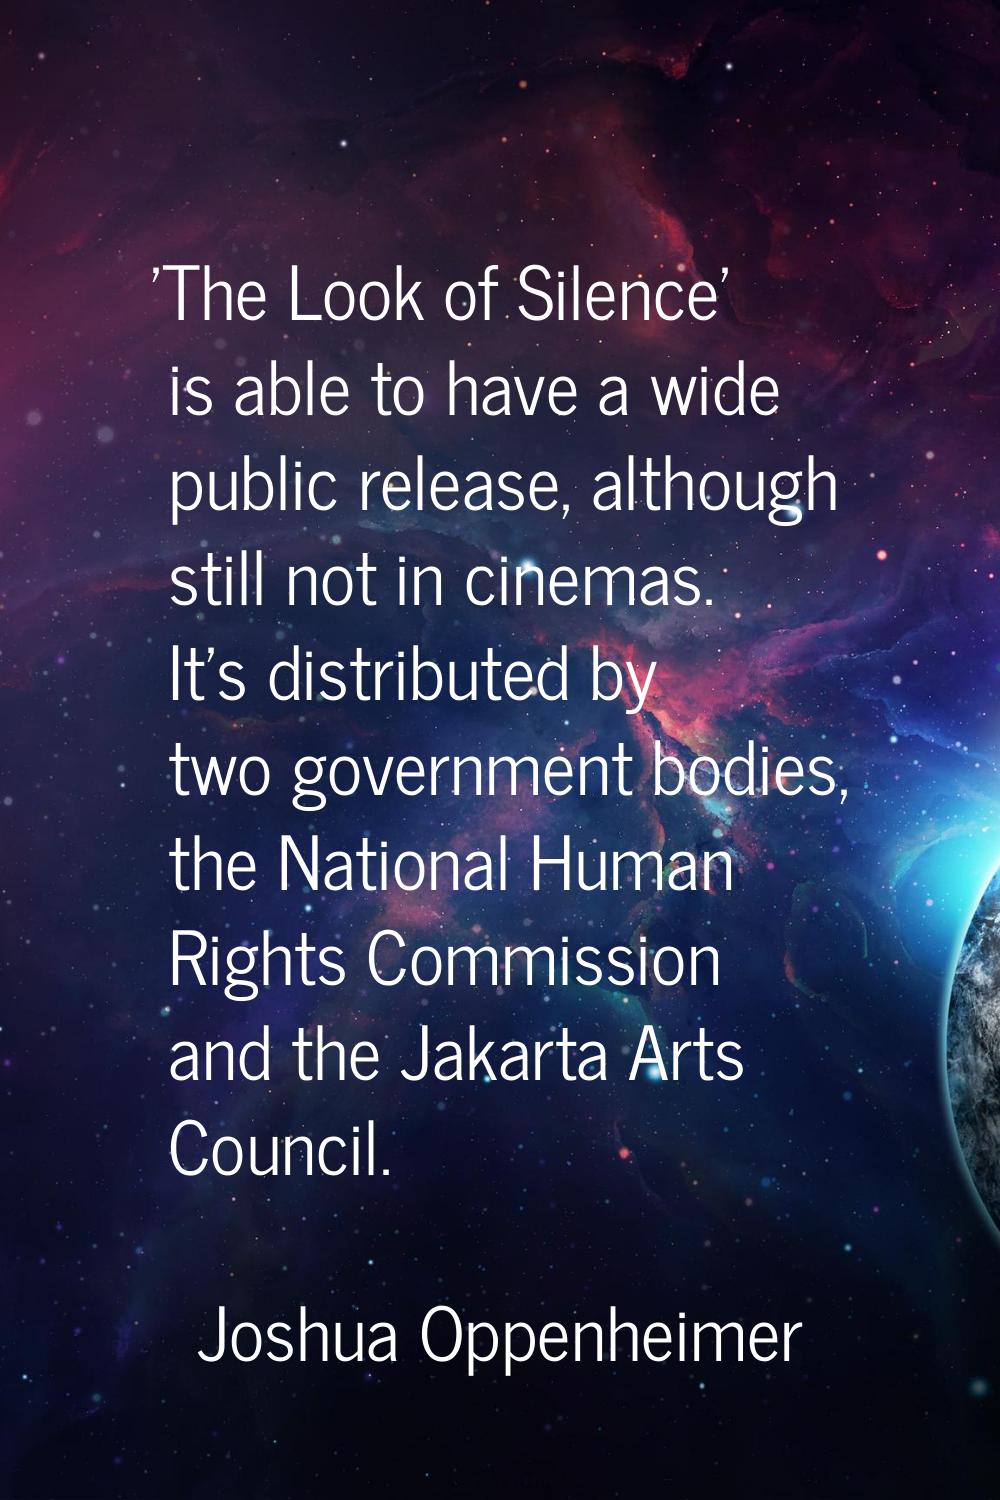 'The Look of Silence' is able to have a wide public release, although still not in cinemas. It's di